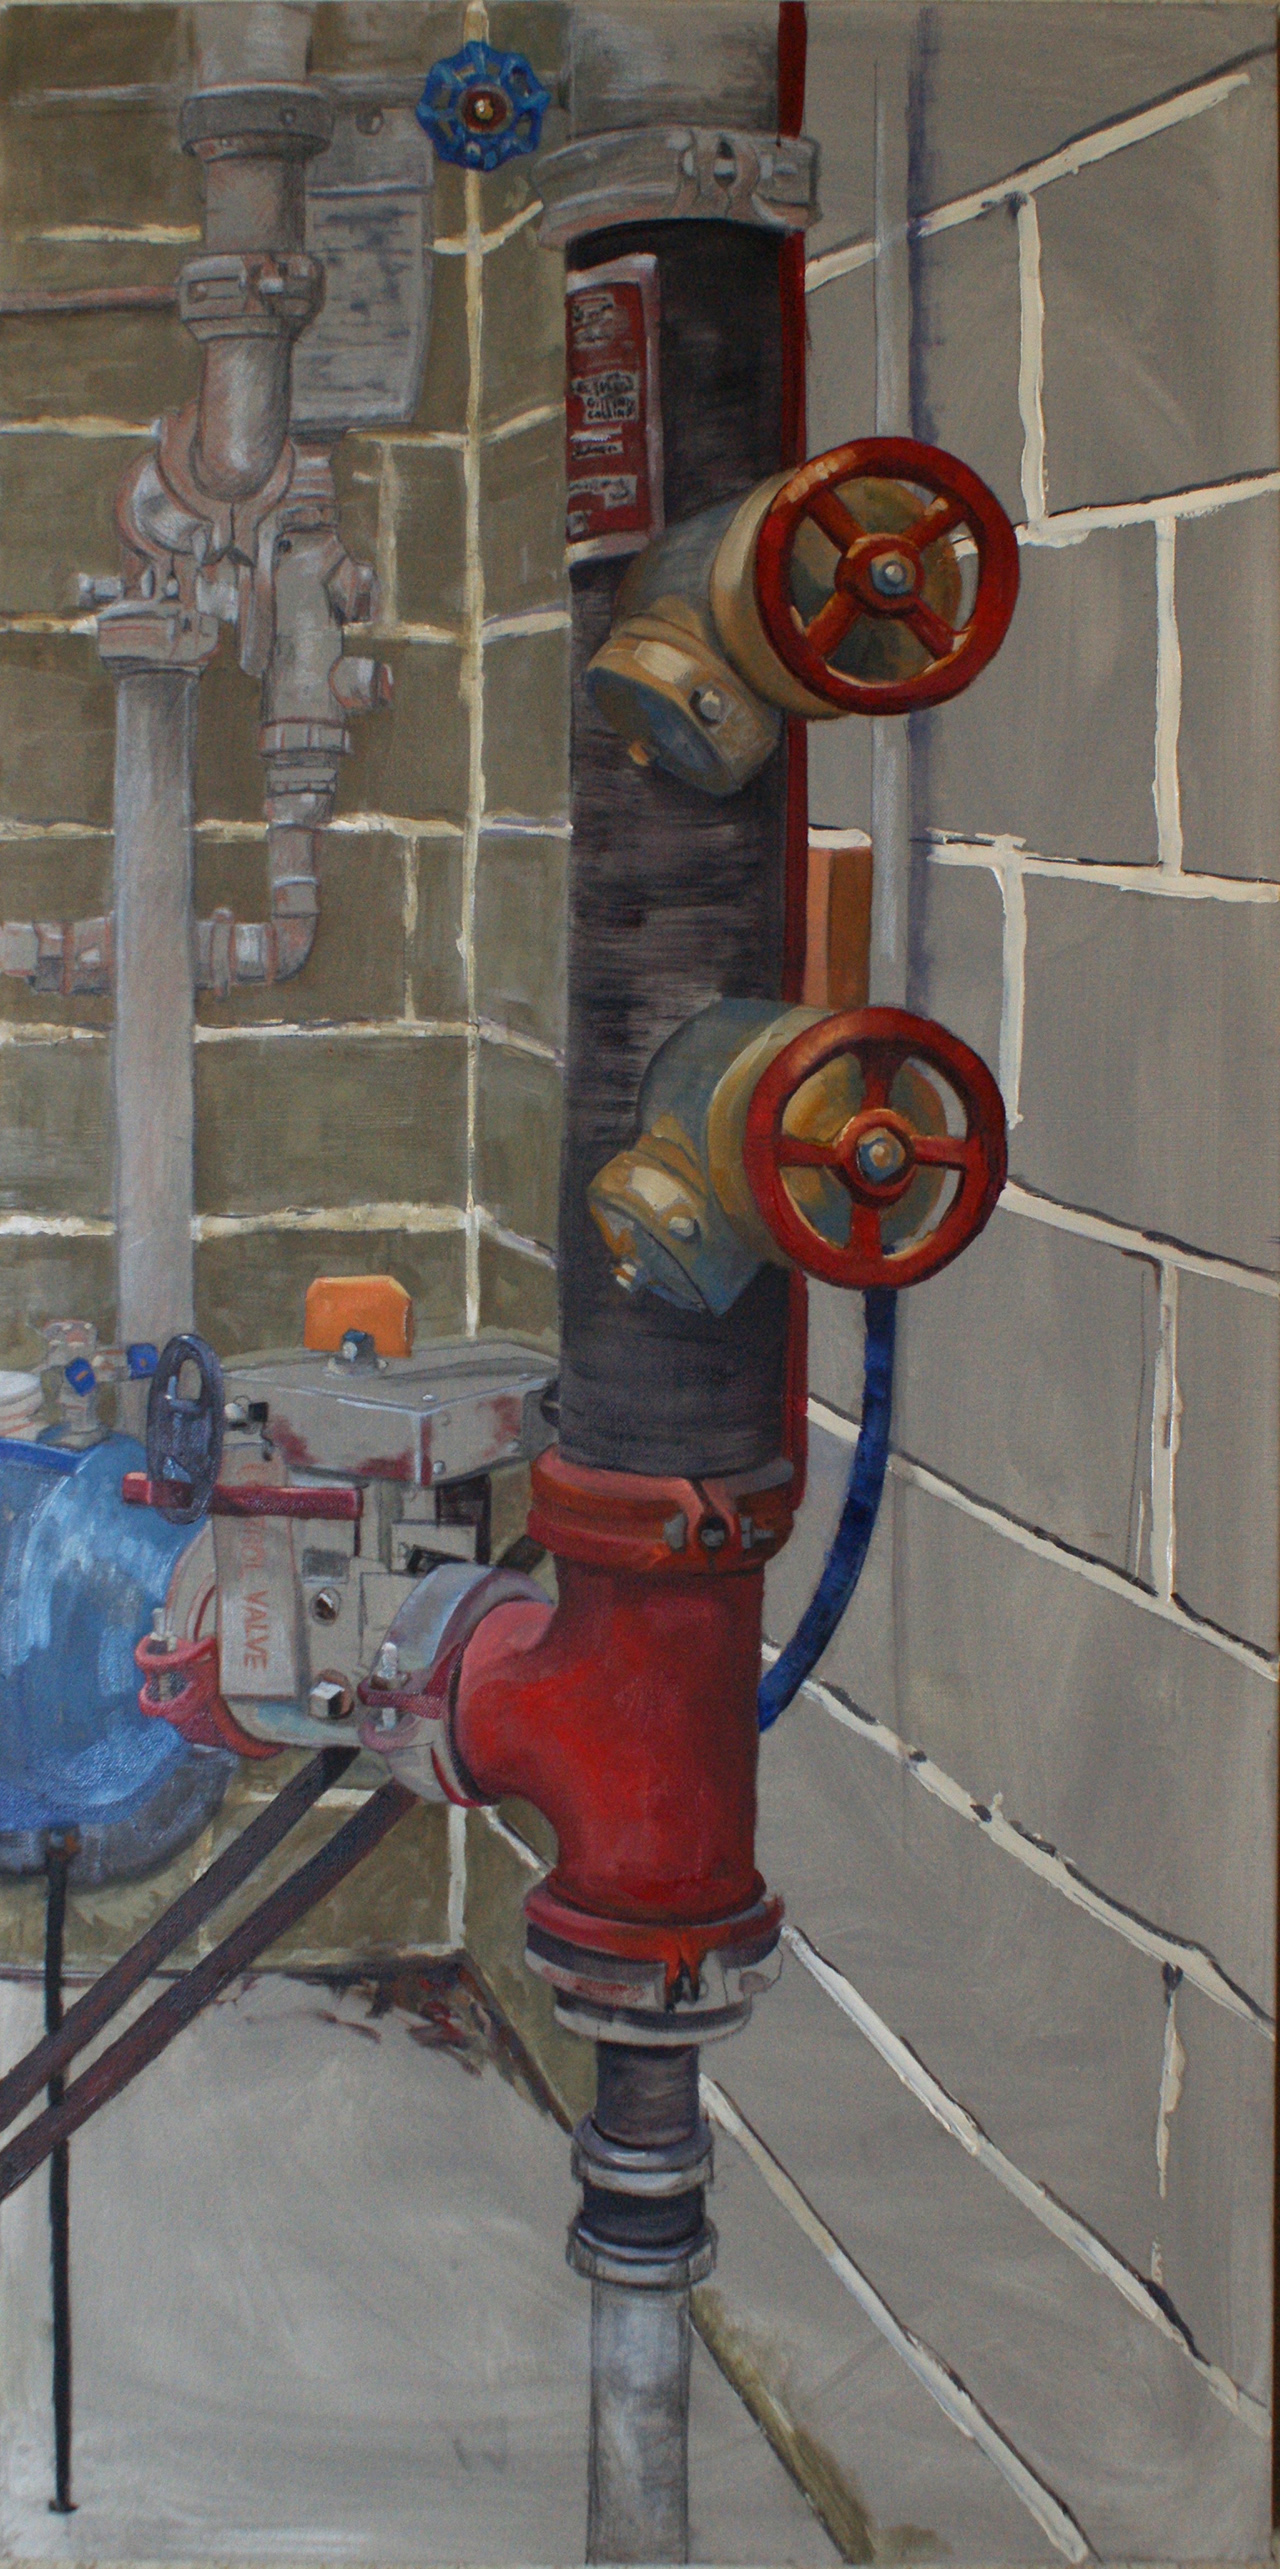 Commercial, Industrial, Mechanical, mixed media, pipe, valve, fire sprinkler system